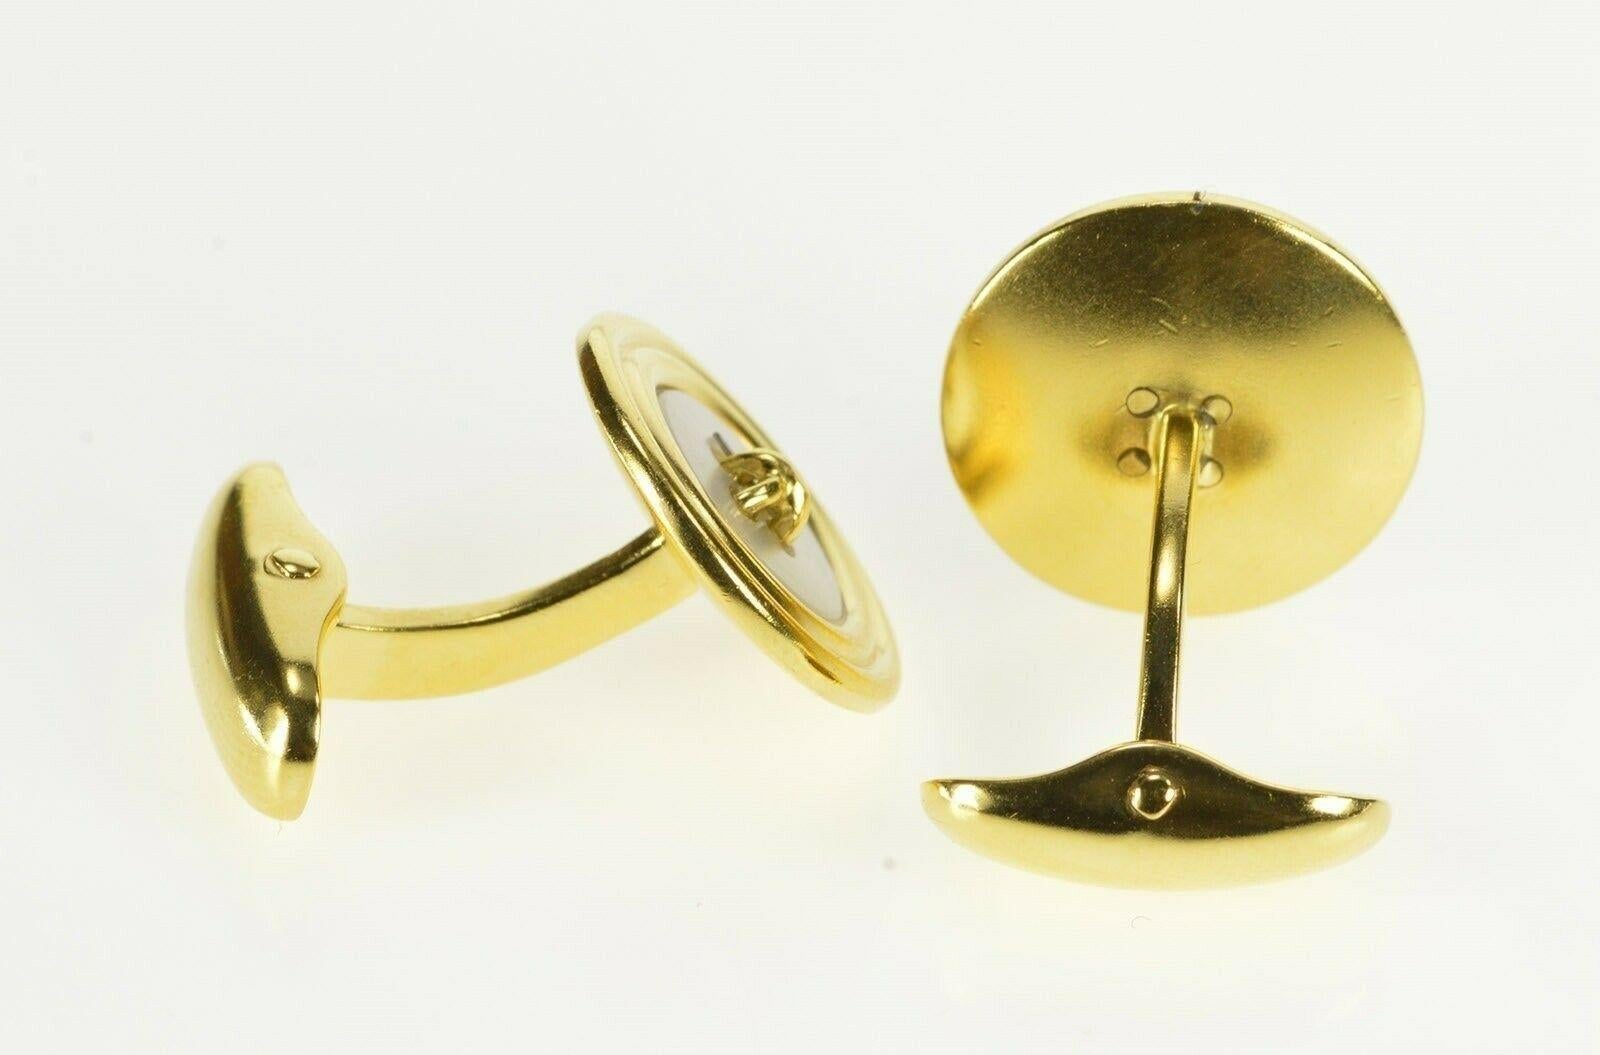 Black Starr & Frost Mother of Pearl Button Gold Cufflinks In Excellent Condition For Sale In Frederick, MD